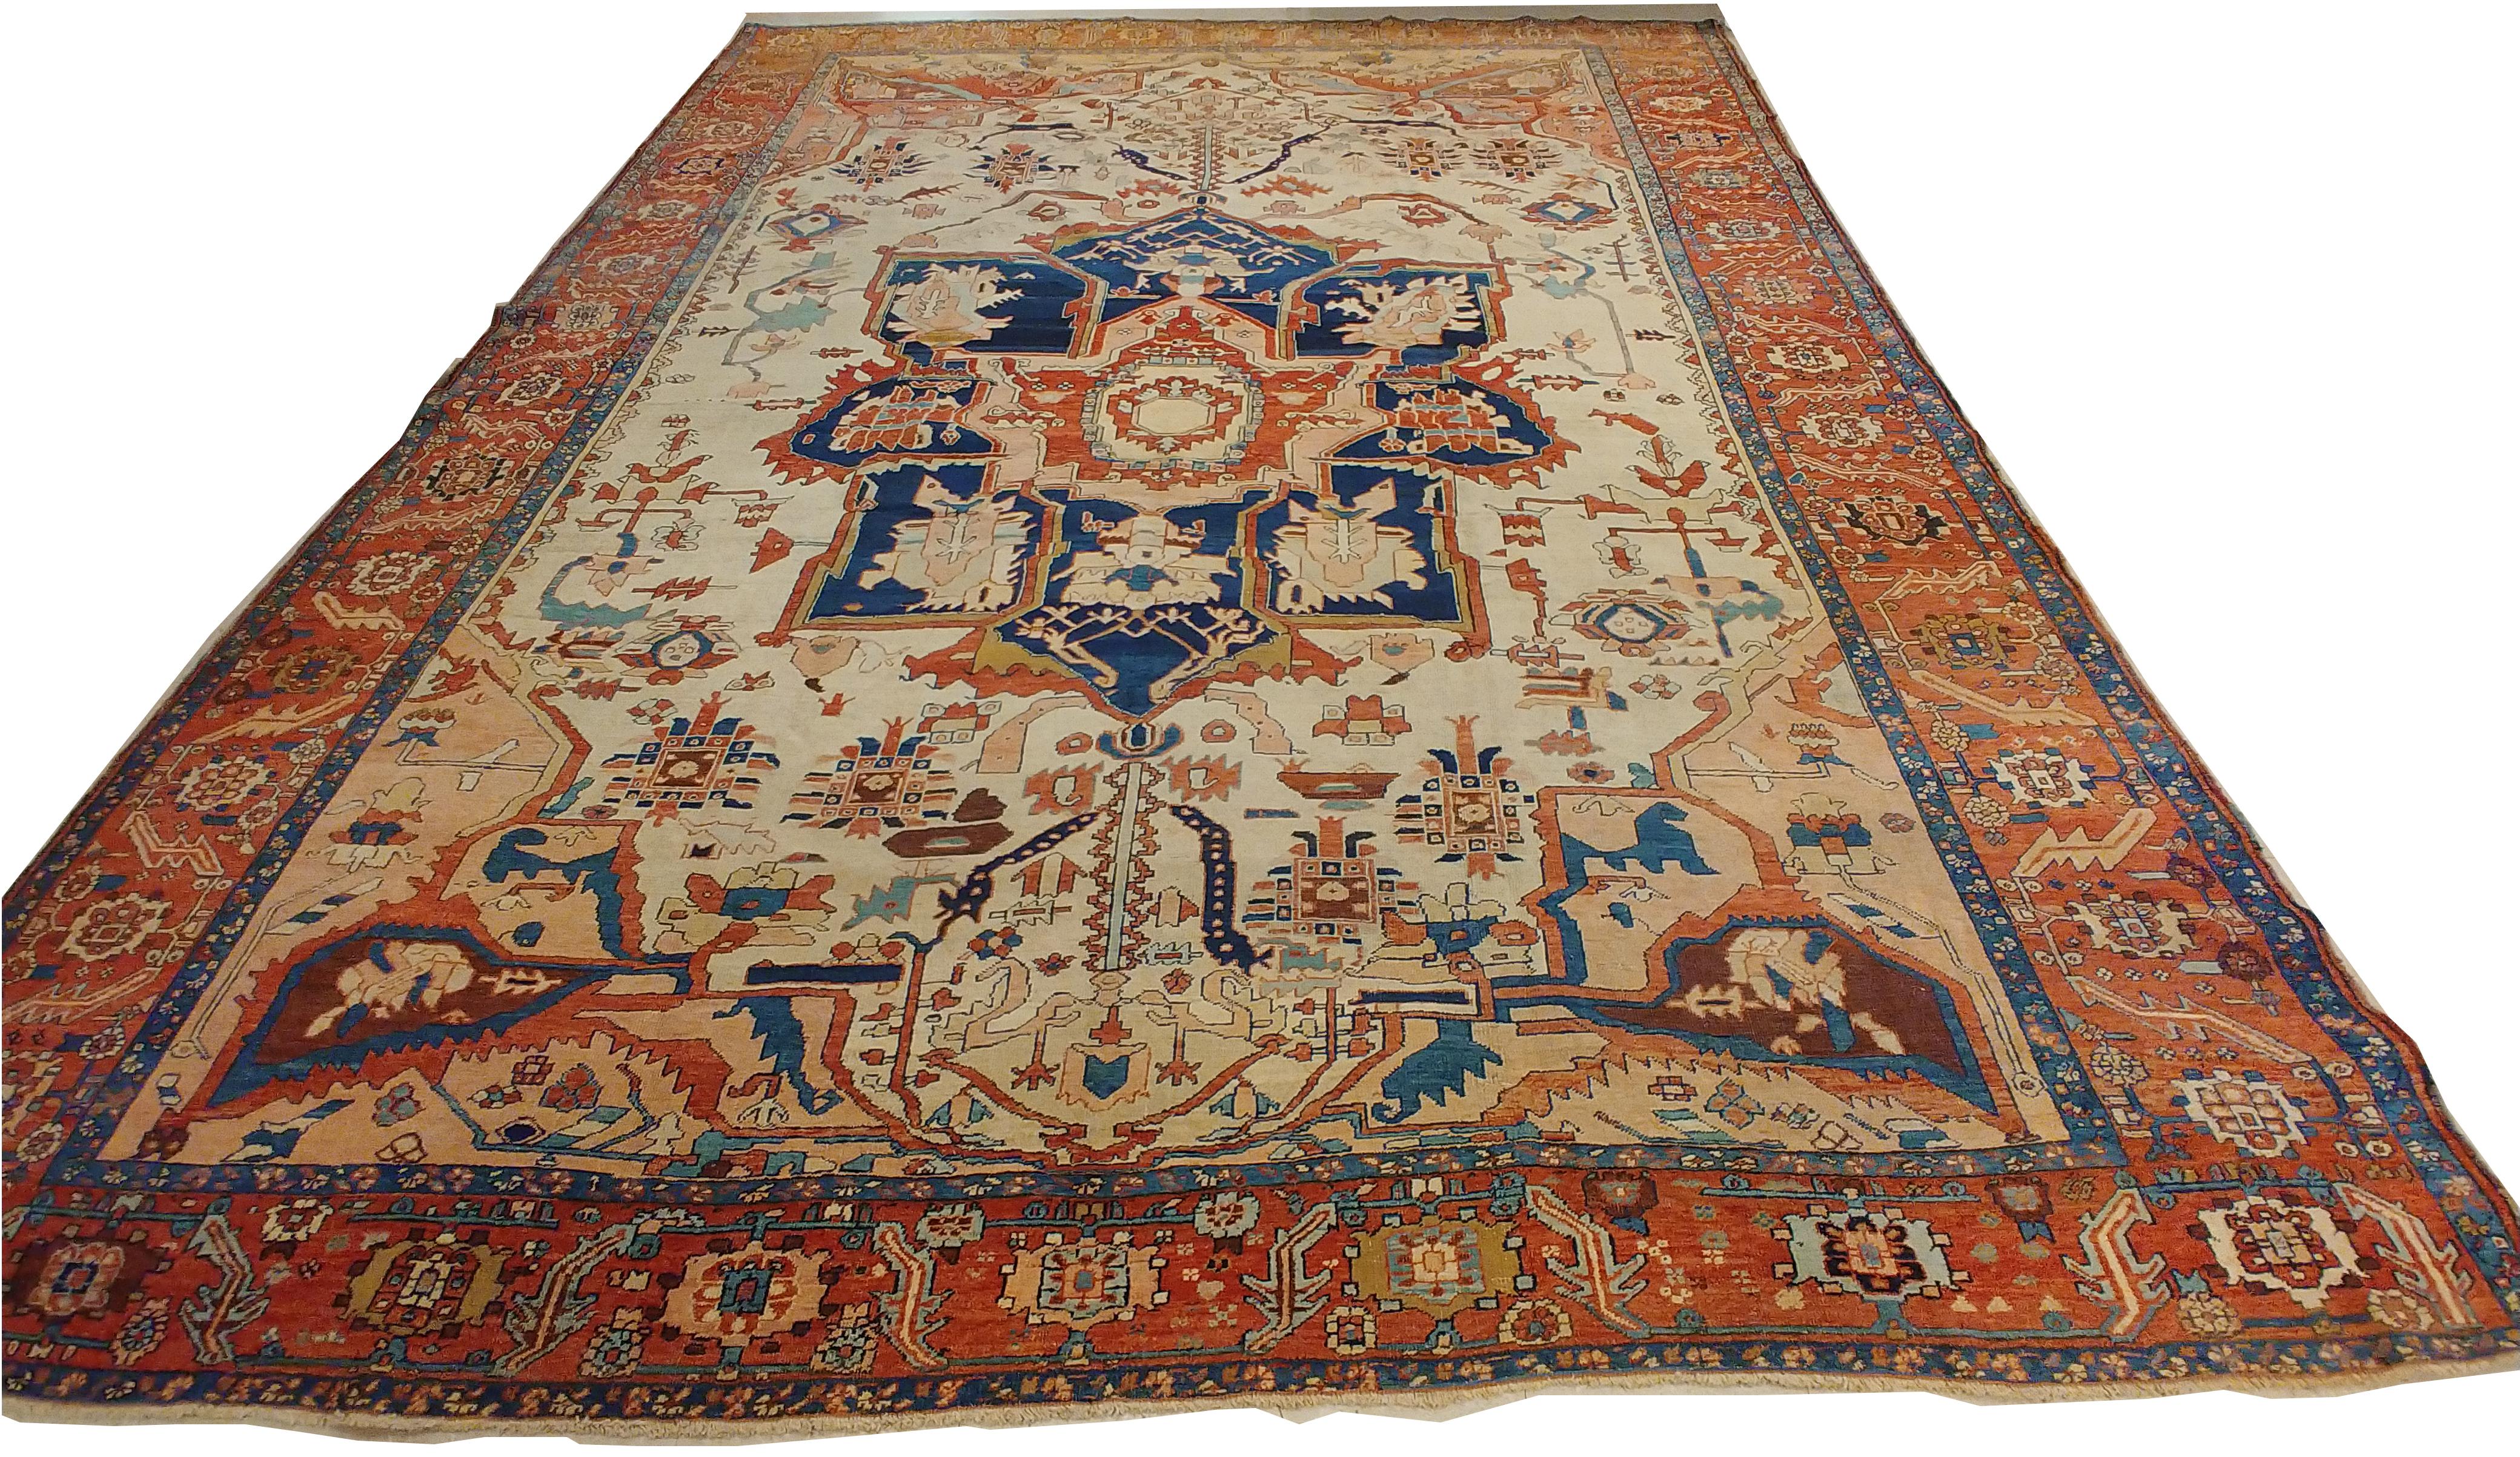 Antique Serapi Carpet, Handmade Wool Oriental Rug, Ivory, Rust, Navy, Light Blue In Excellent Condition For Sale In Port Washington, NY